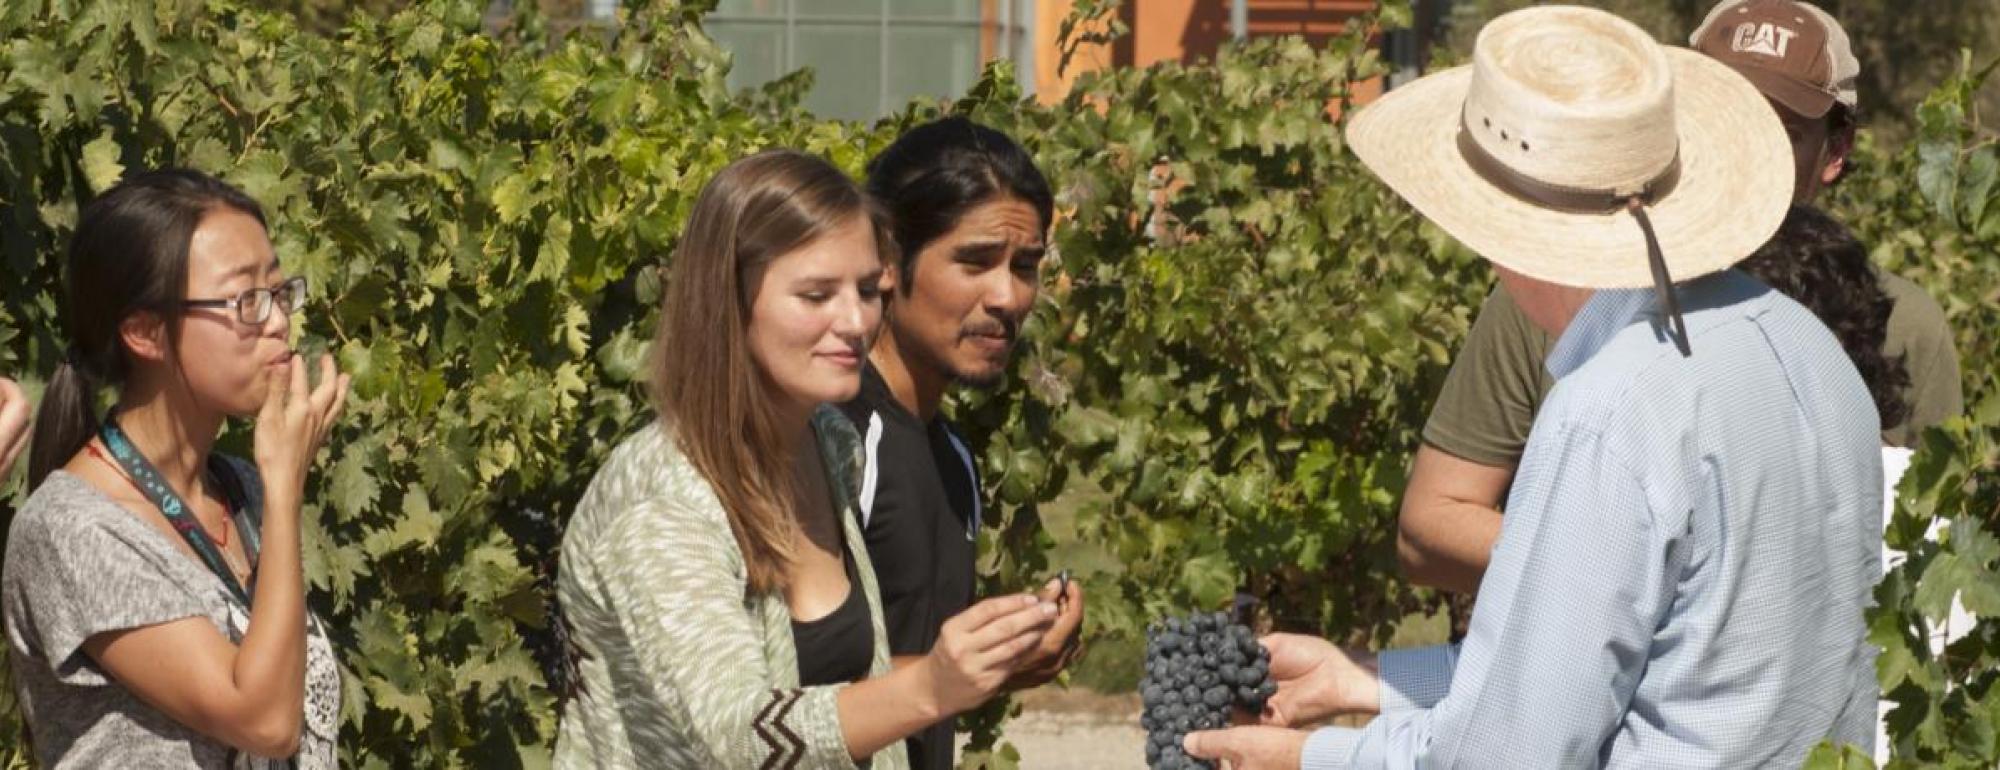 uc davis viticulture and enology majors taste grapes together in vineyard